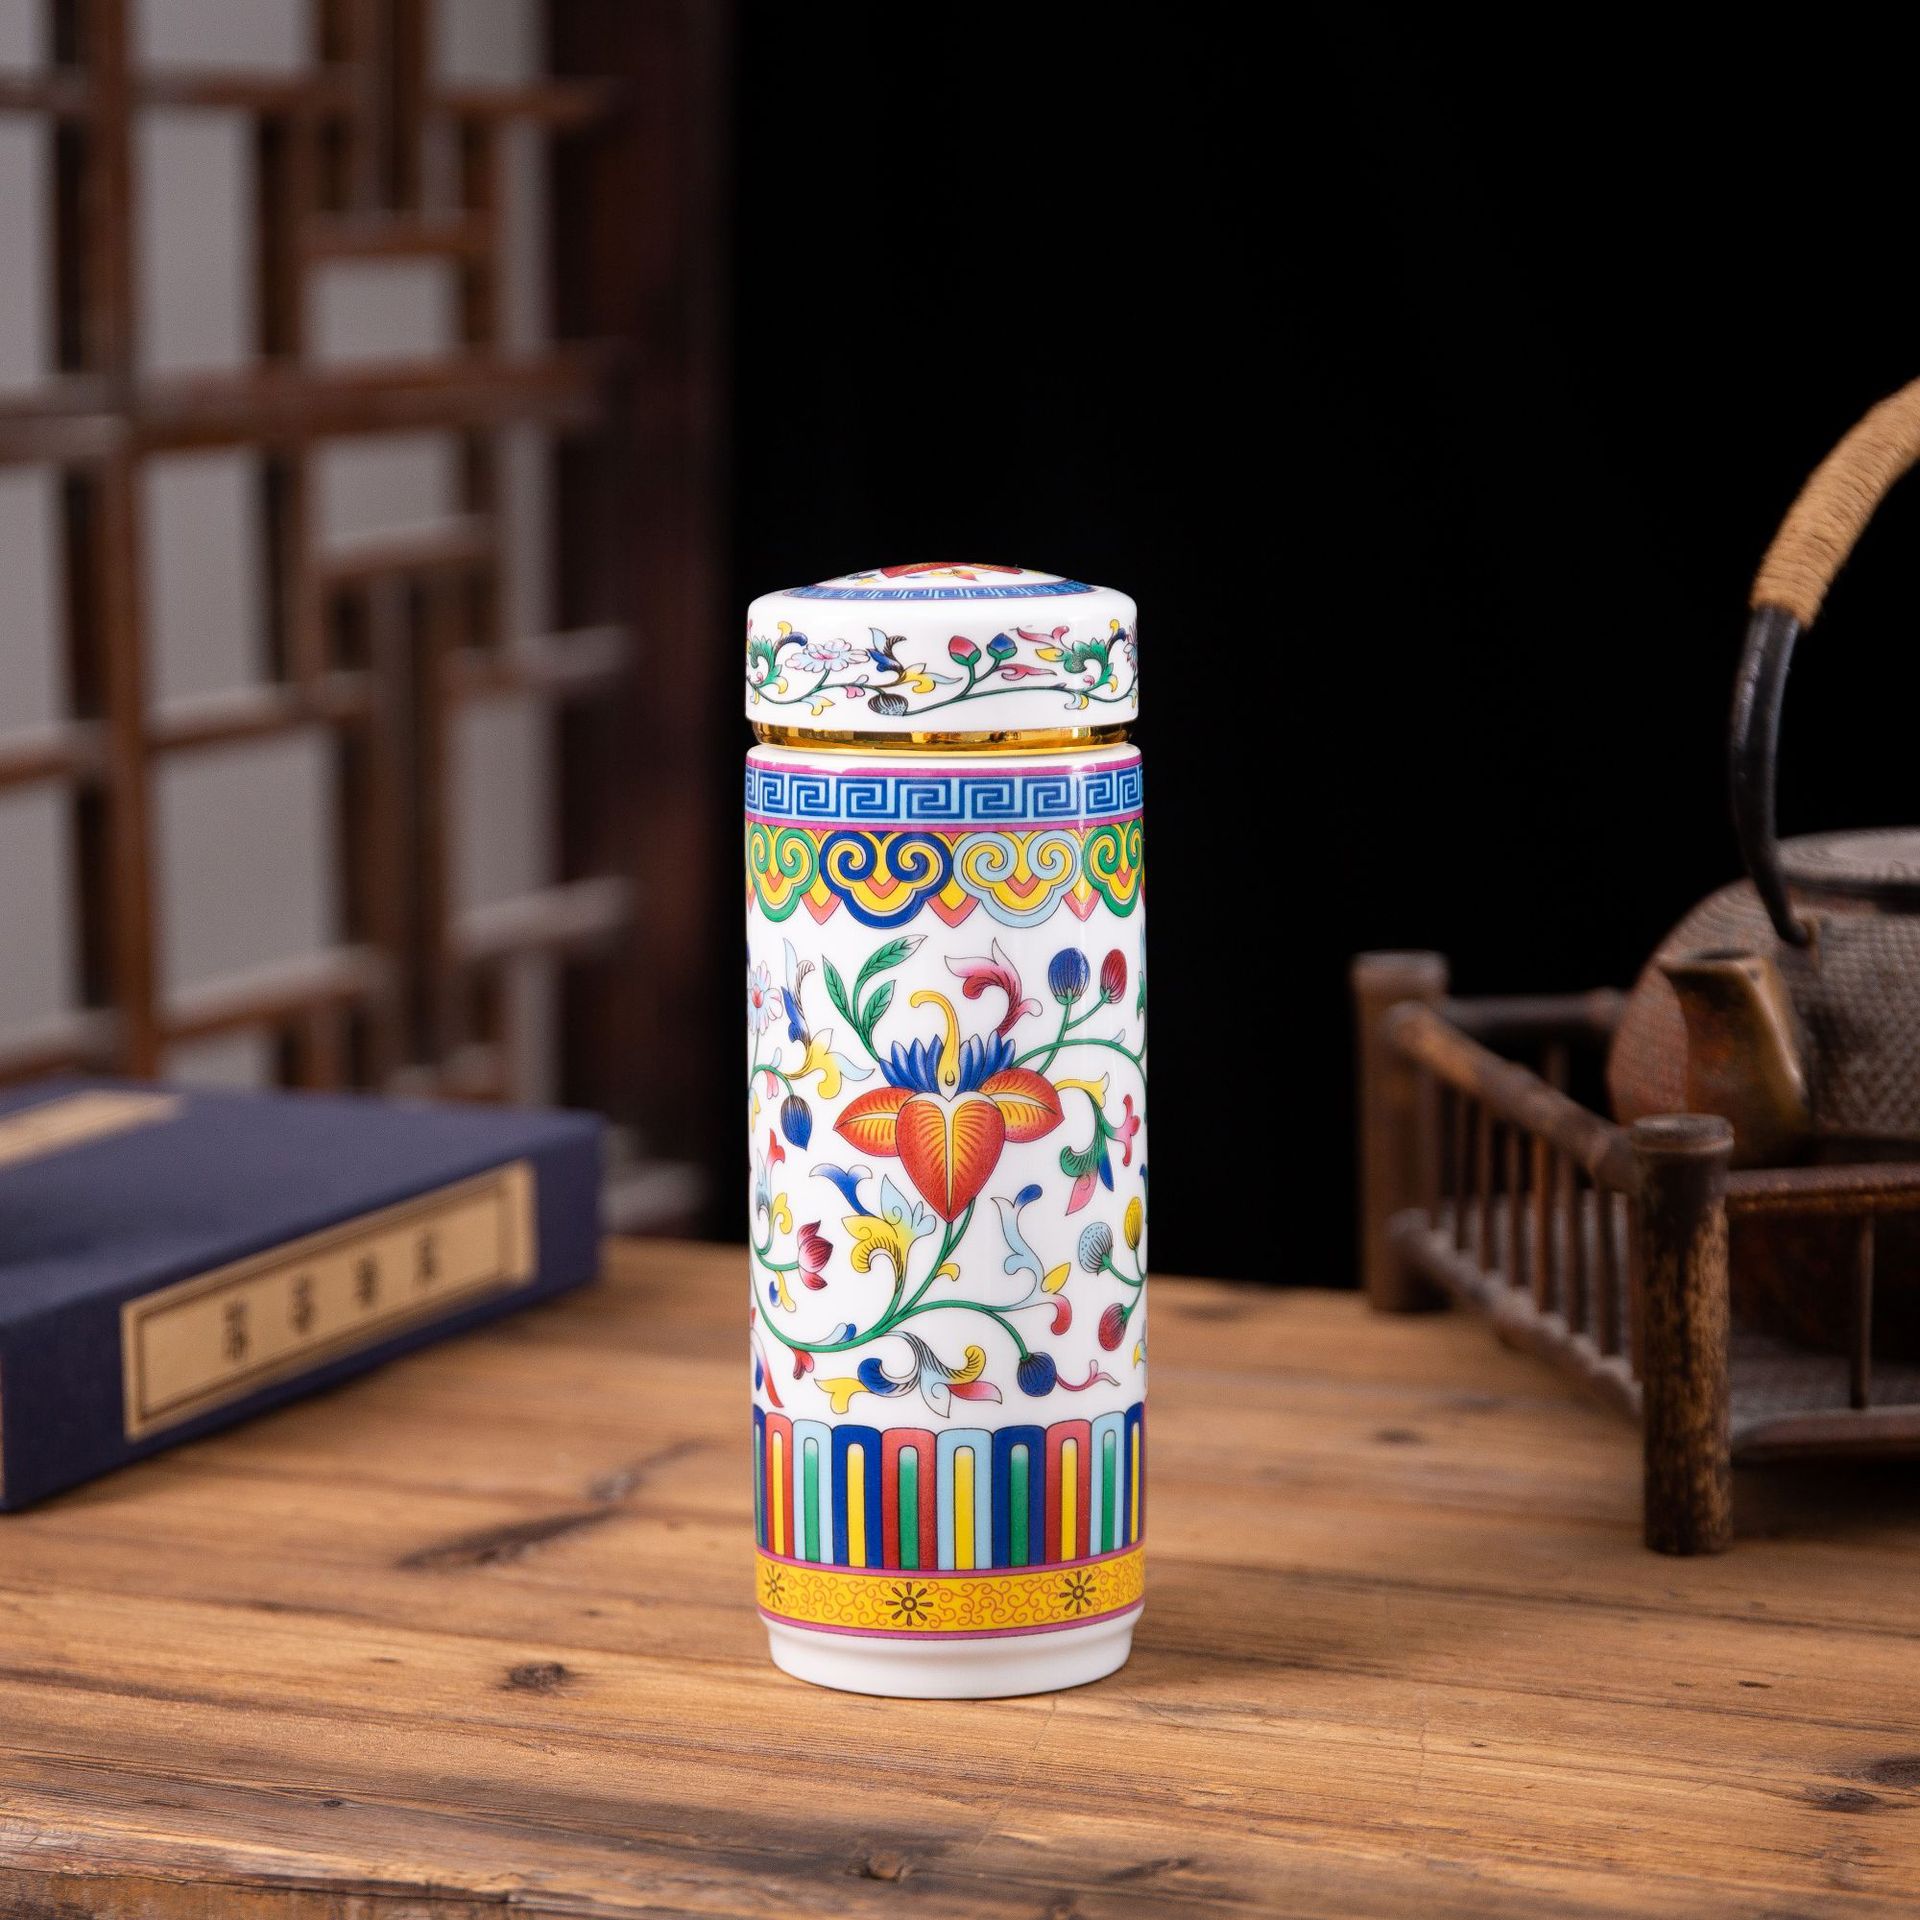 Jingdezhen Ceramic Palace Enamel Insulation Cup Large-Capacity Water Cup Tumbler New Creative Business Gift Cup